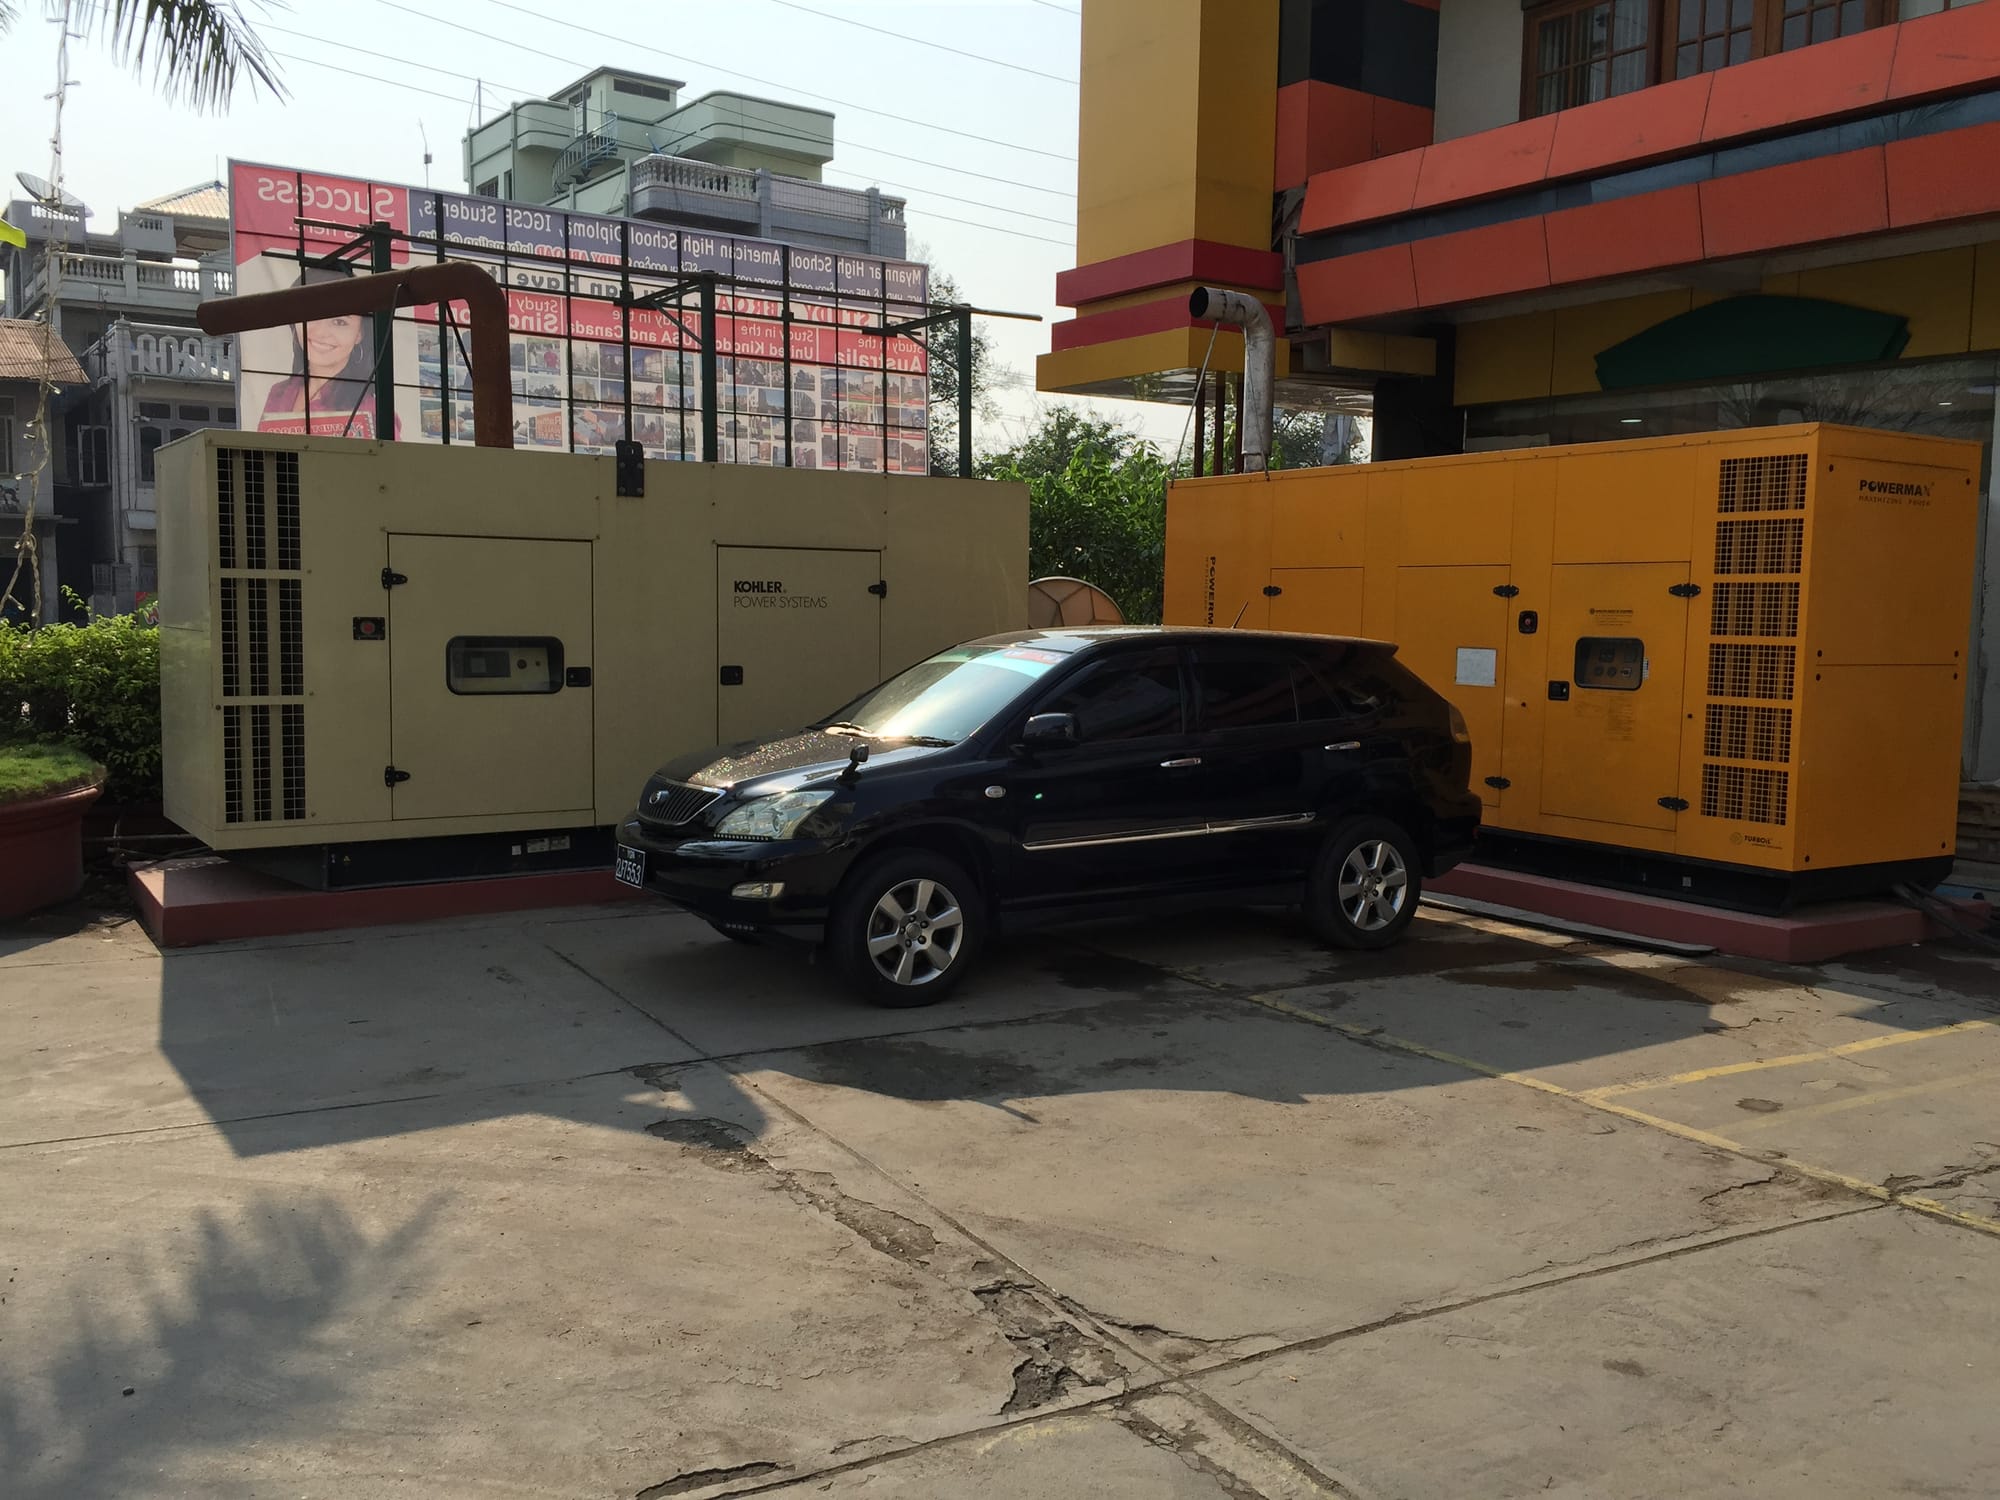 Photo by Author — emergency generators in the hotel carpark